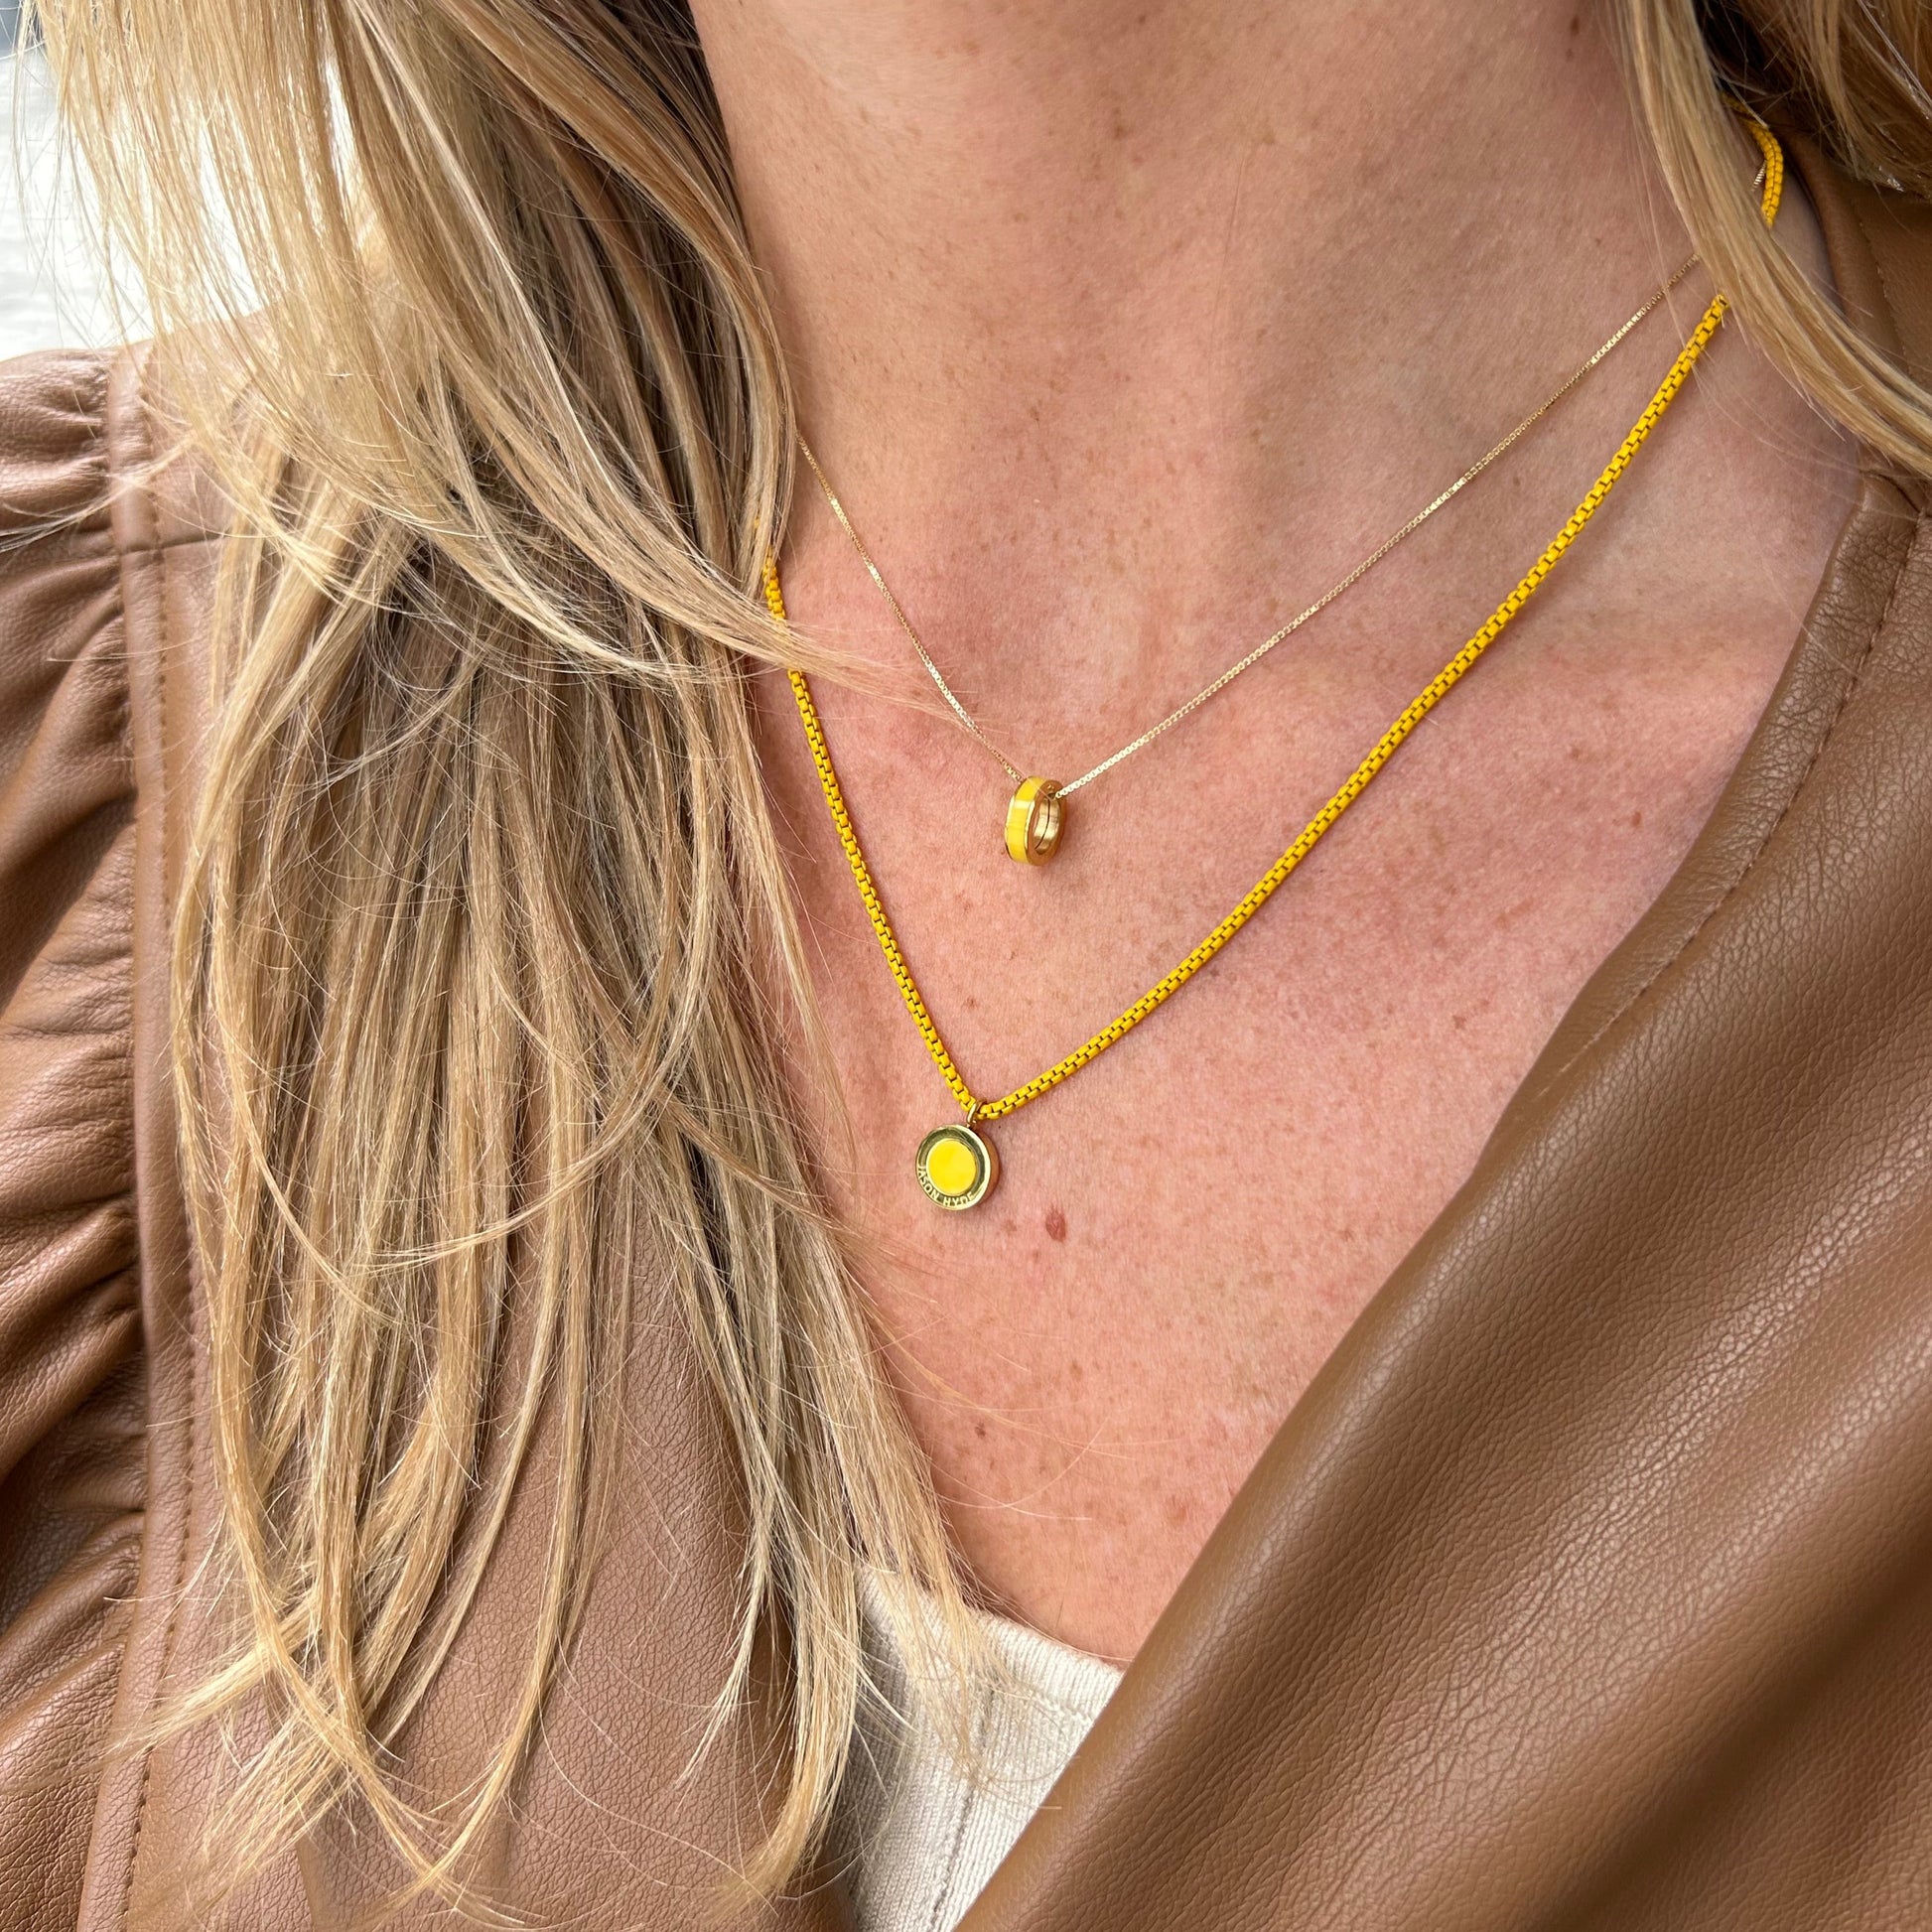 OCEAN YELLOW SPECTRA CHAIN YELLOW SPECTRA CHIP NECKLACE